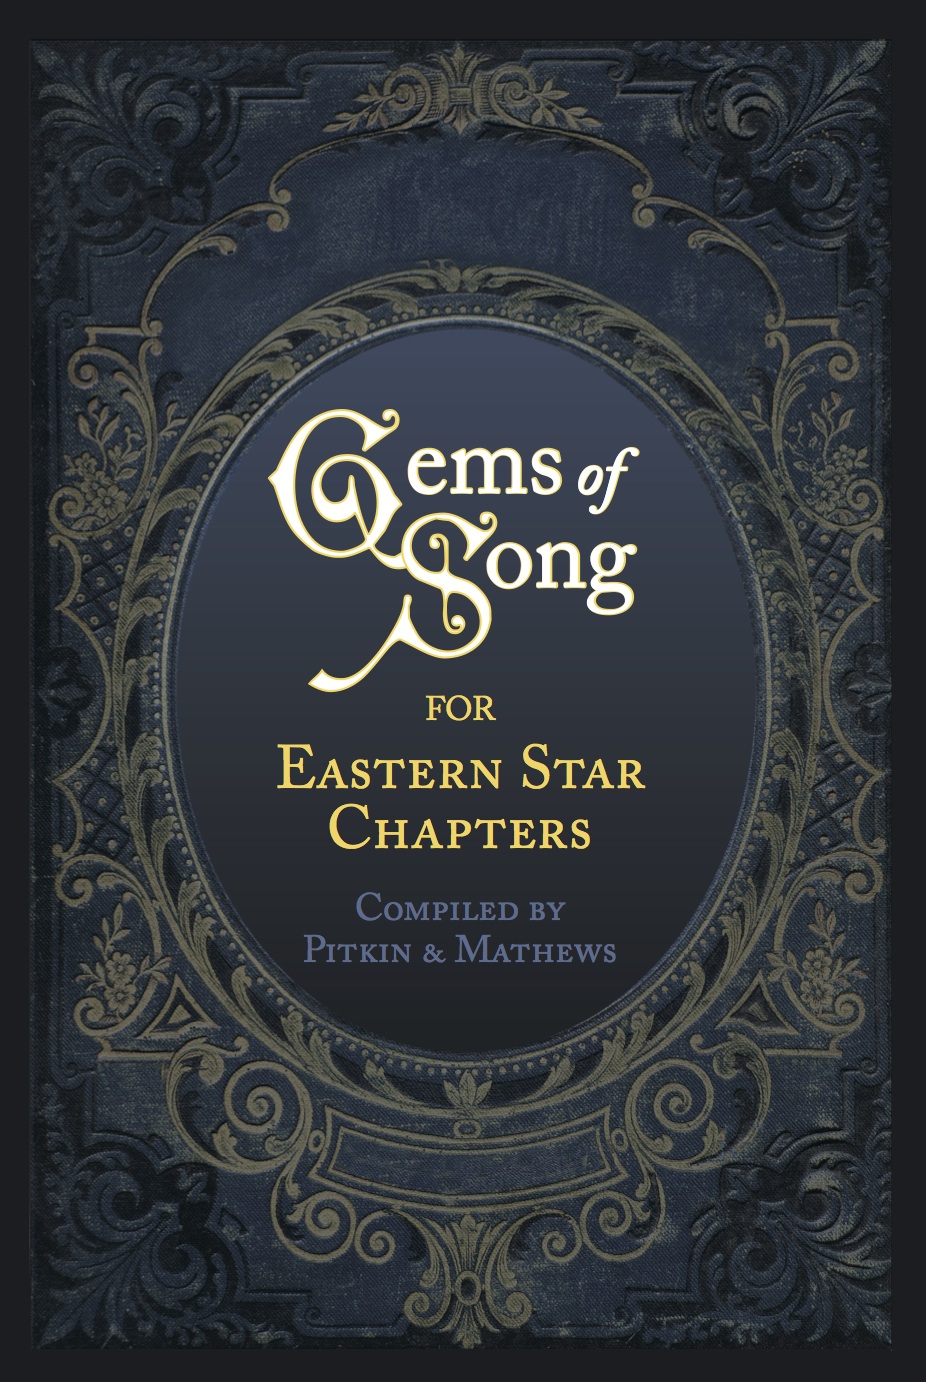 Gems of Song for Eastern Star Chapters